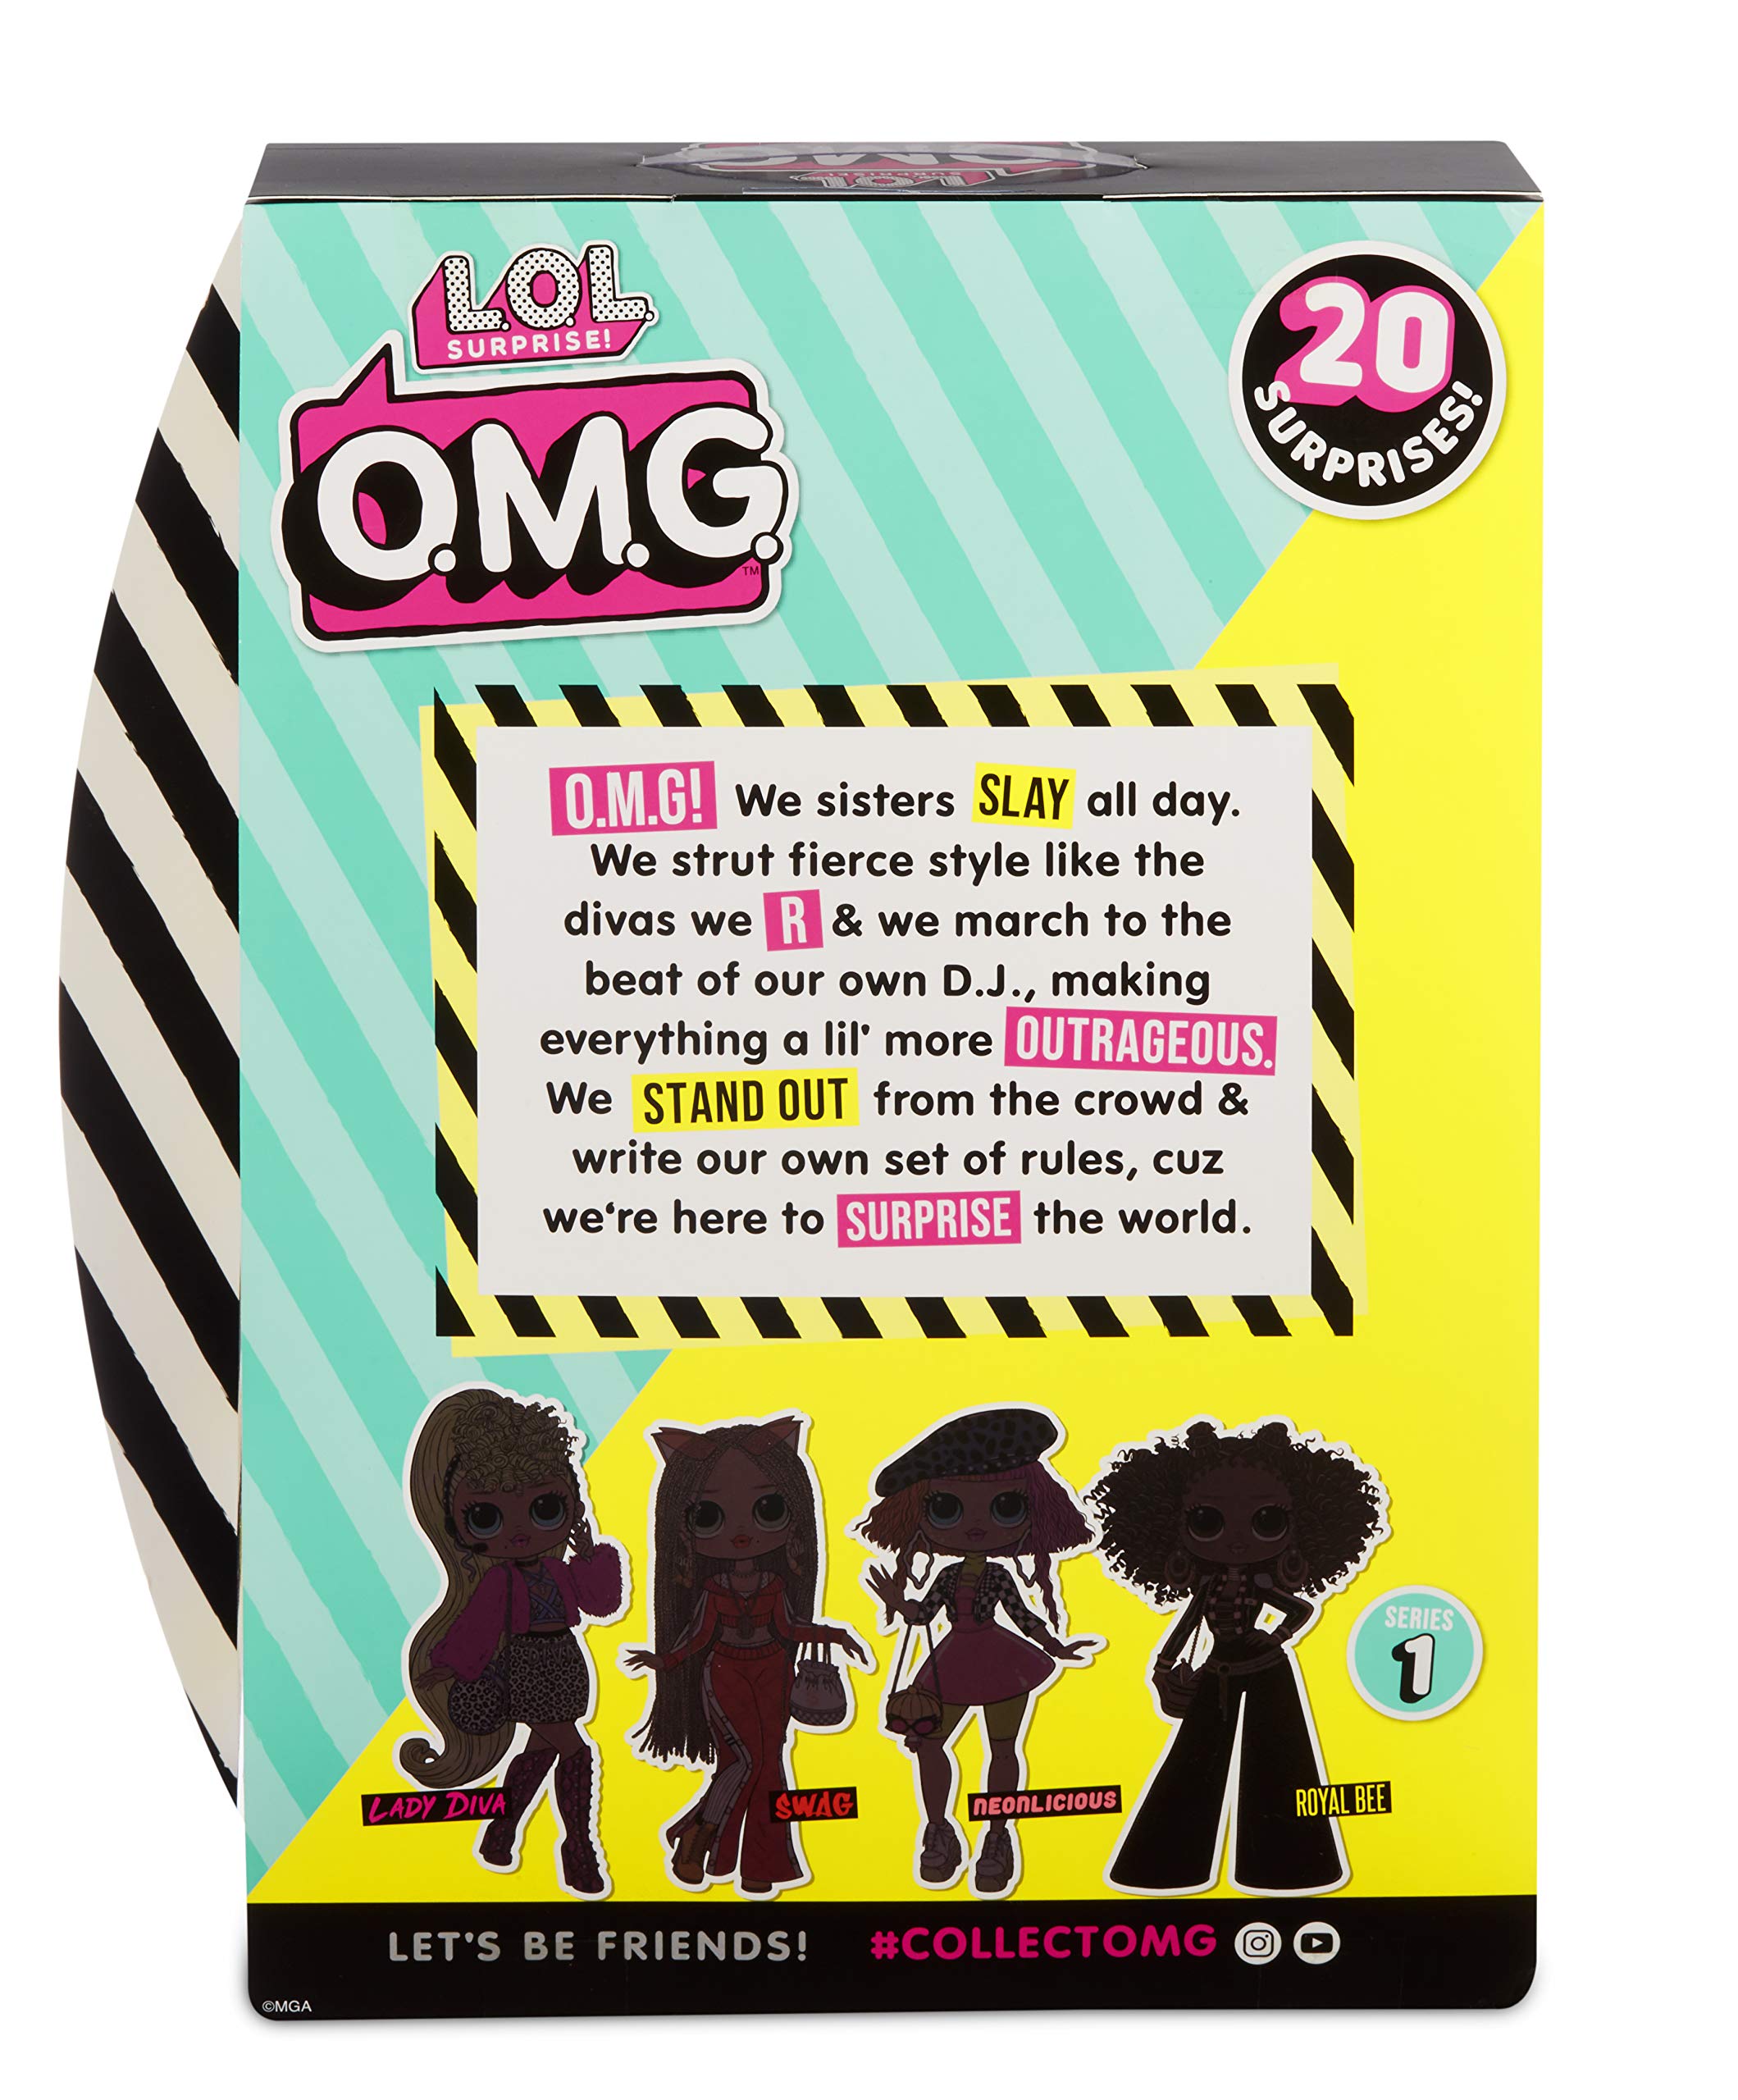 L.O.L. Surprise! O.M.G. Royal Bee Fashion Doll with 20 Surprises